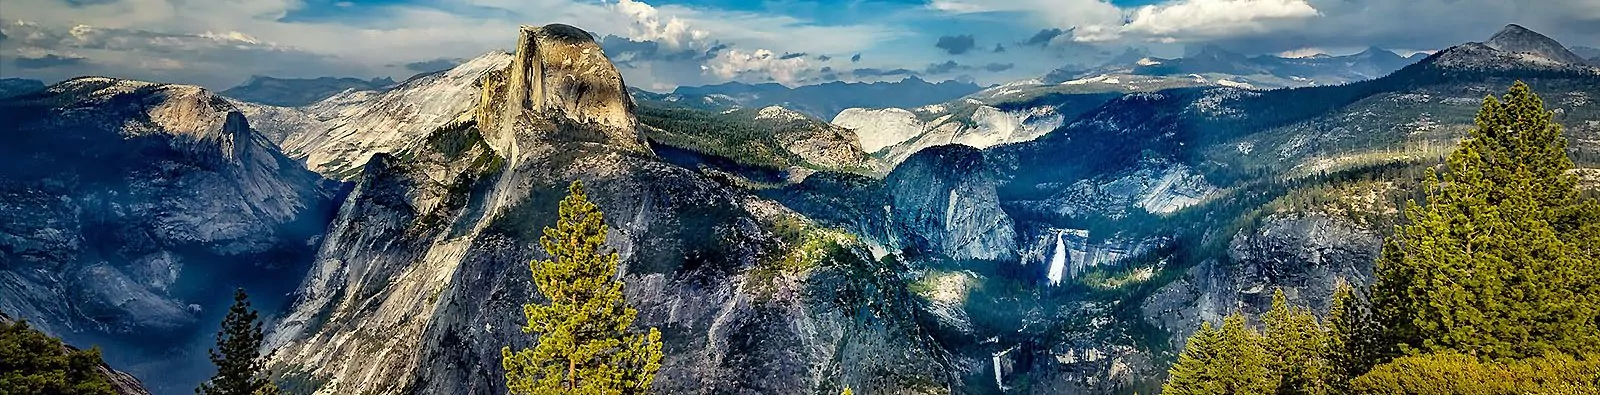 View from Glacier Point in Yosemite National Park